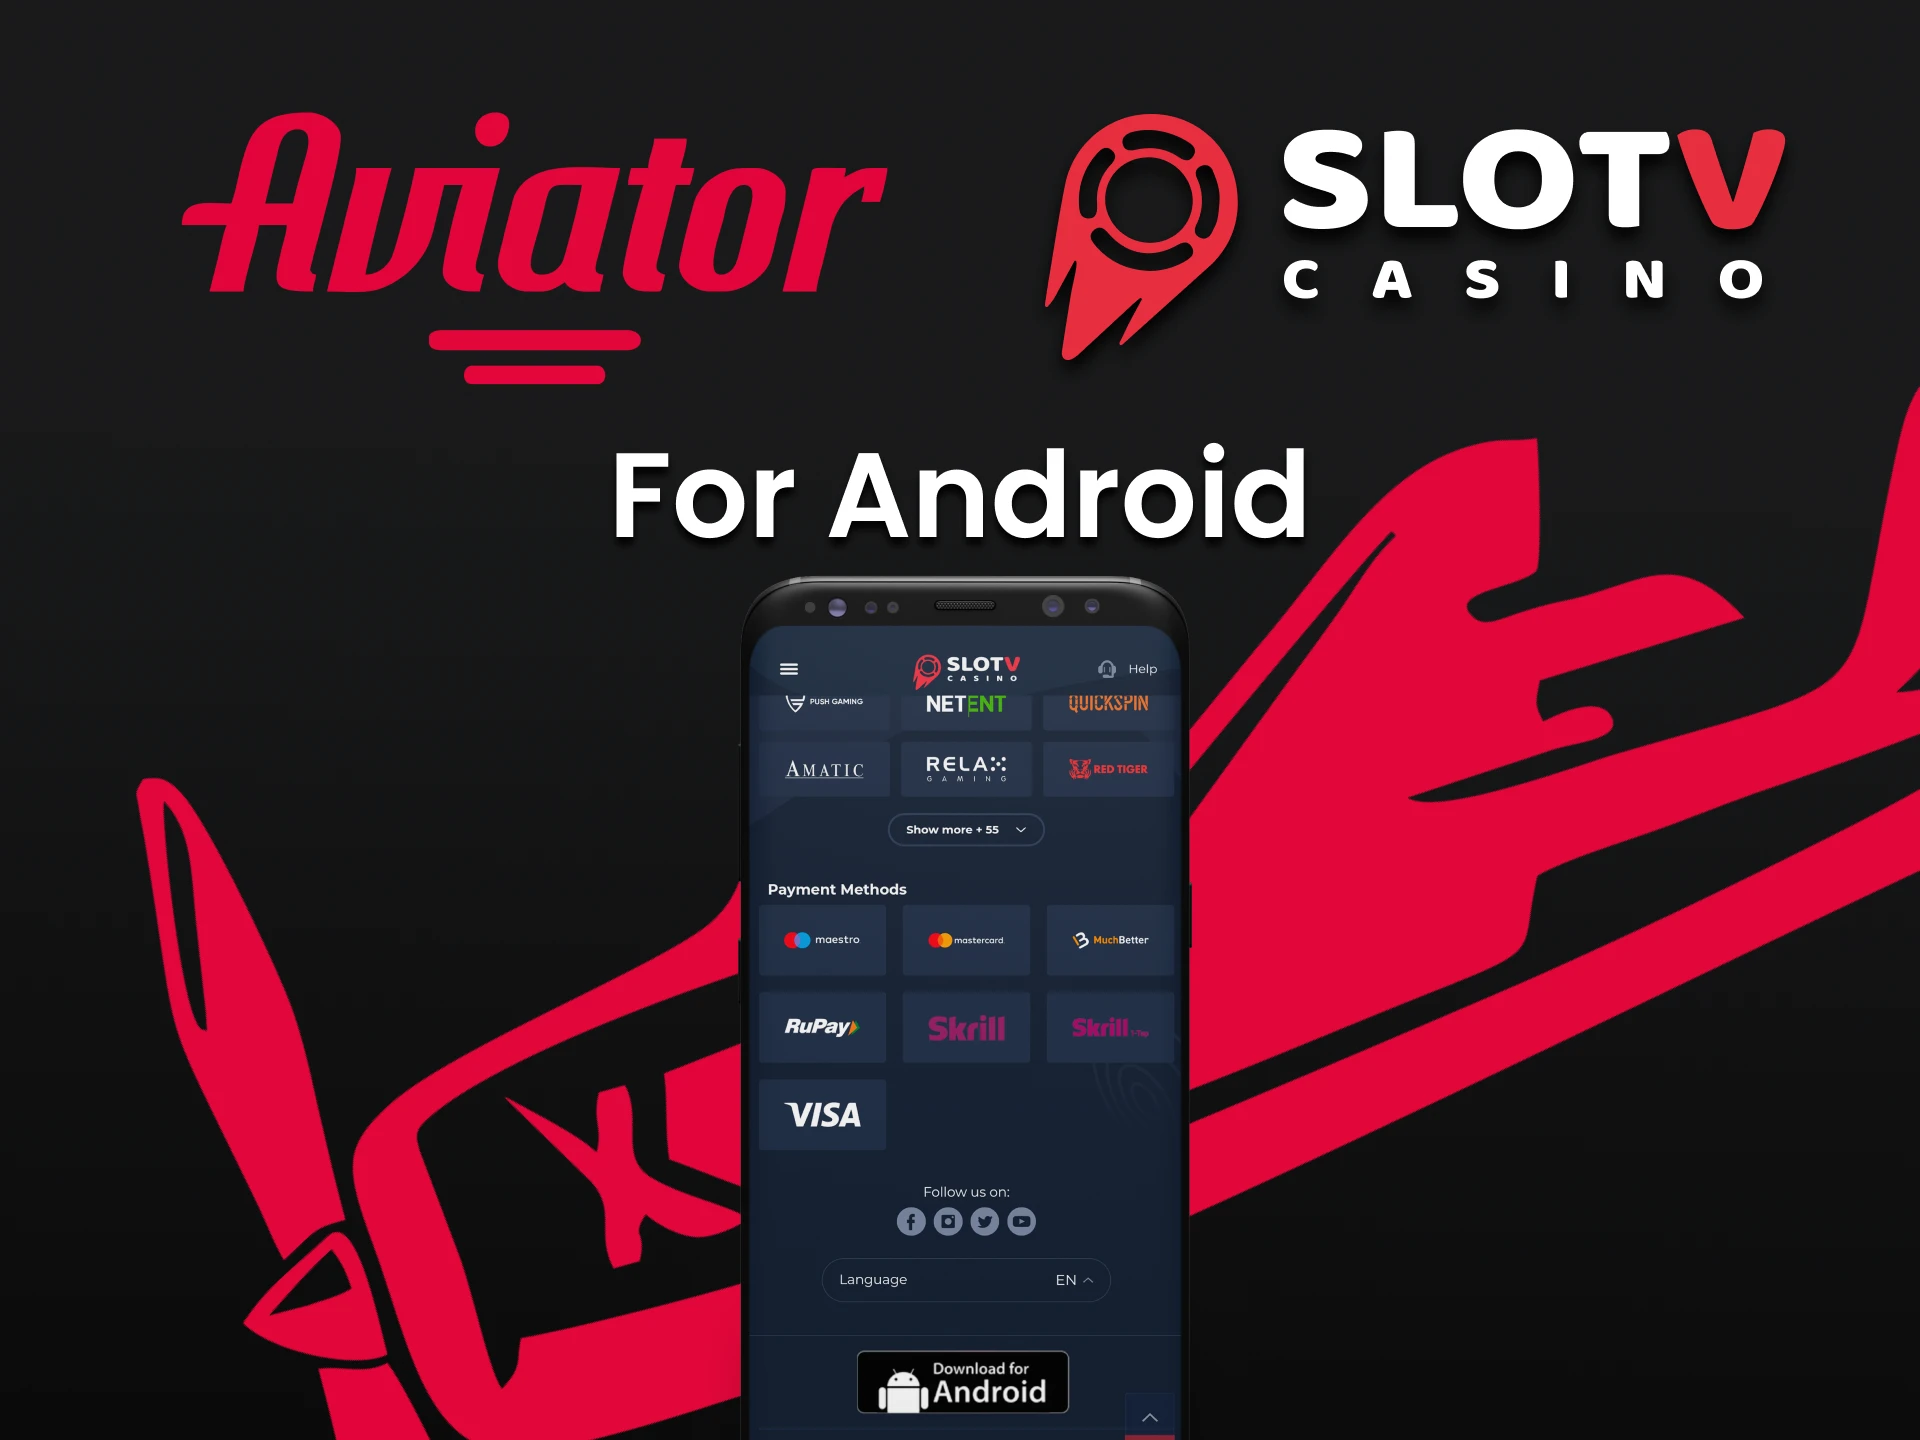 Install SlotV app for Android to play Aviator.